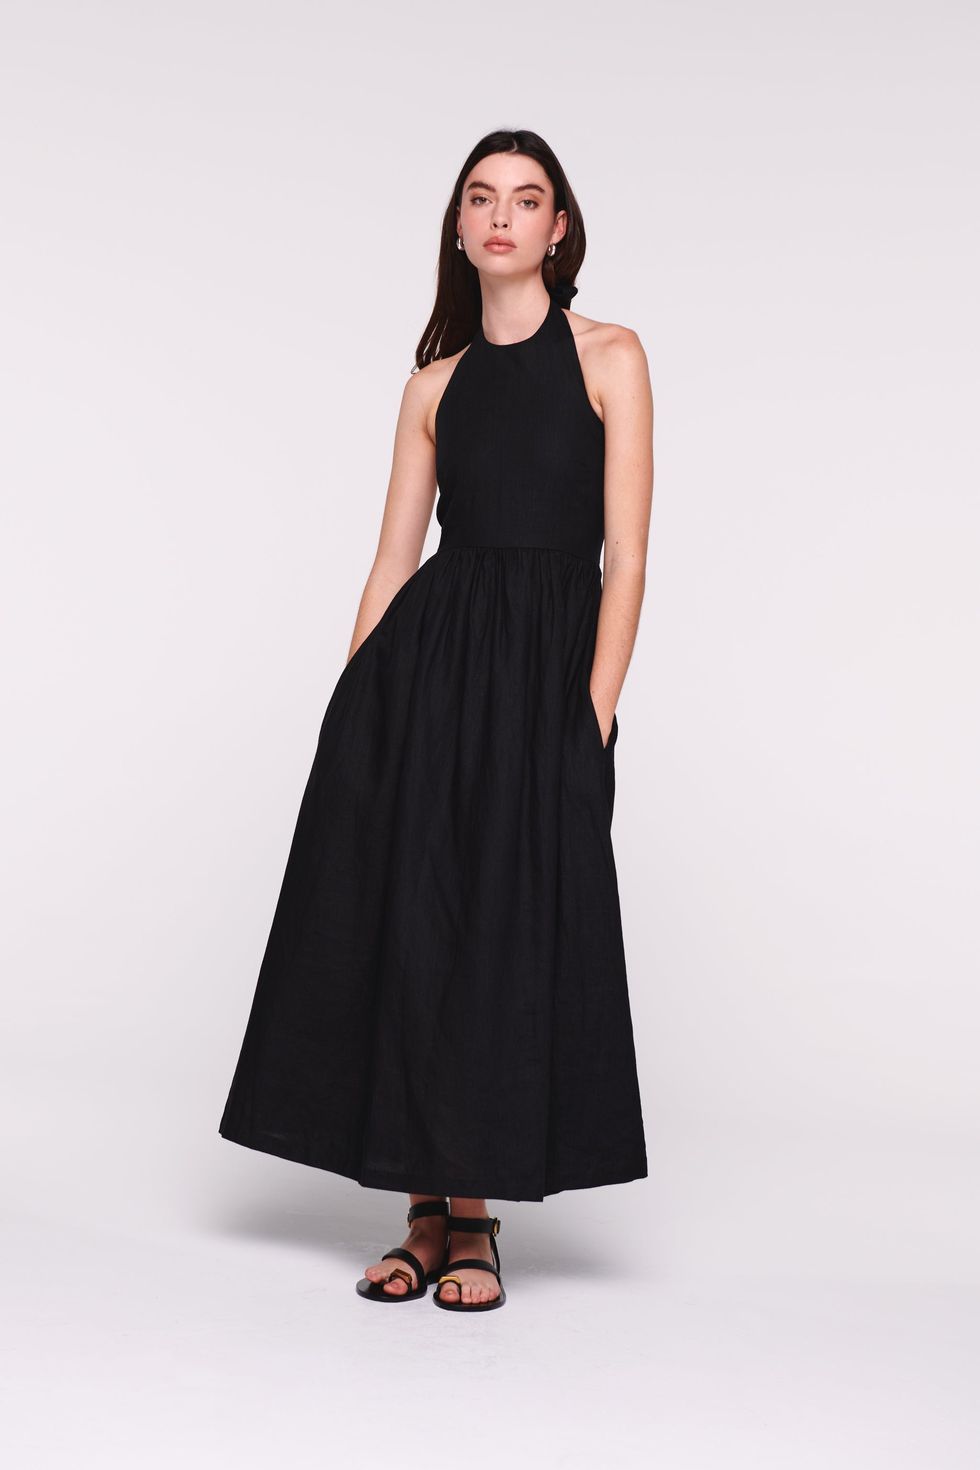 Best maxi dress UK: 16 maxi dresses for women to buy in 2023